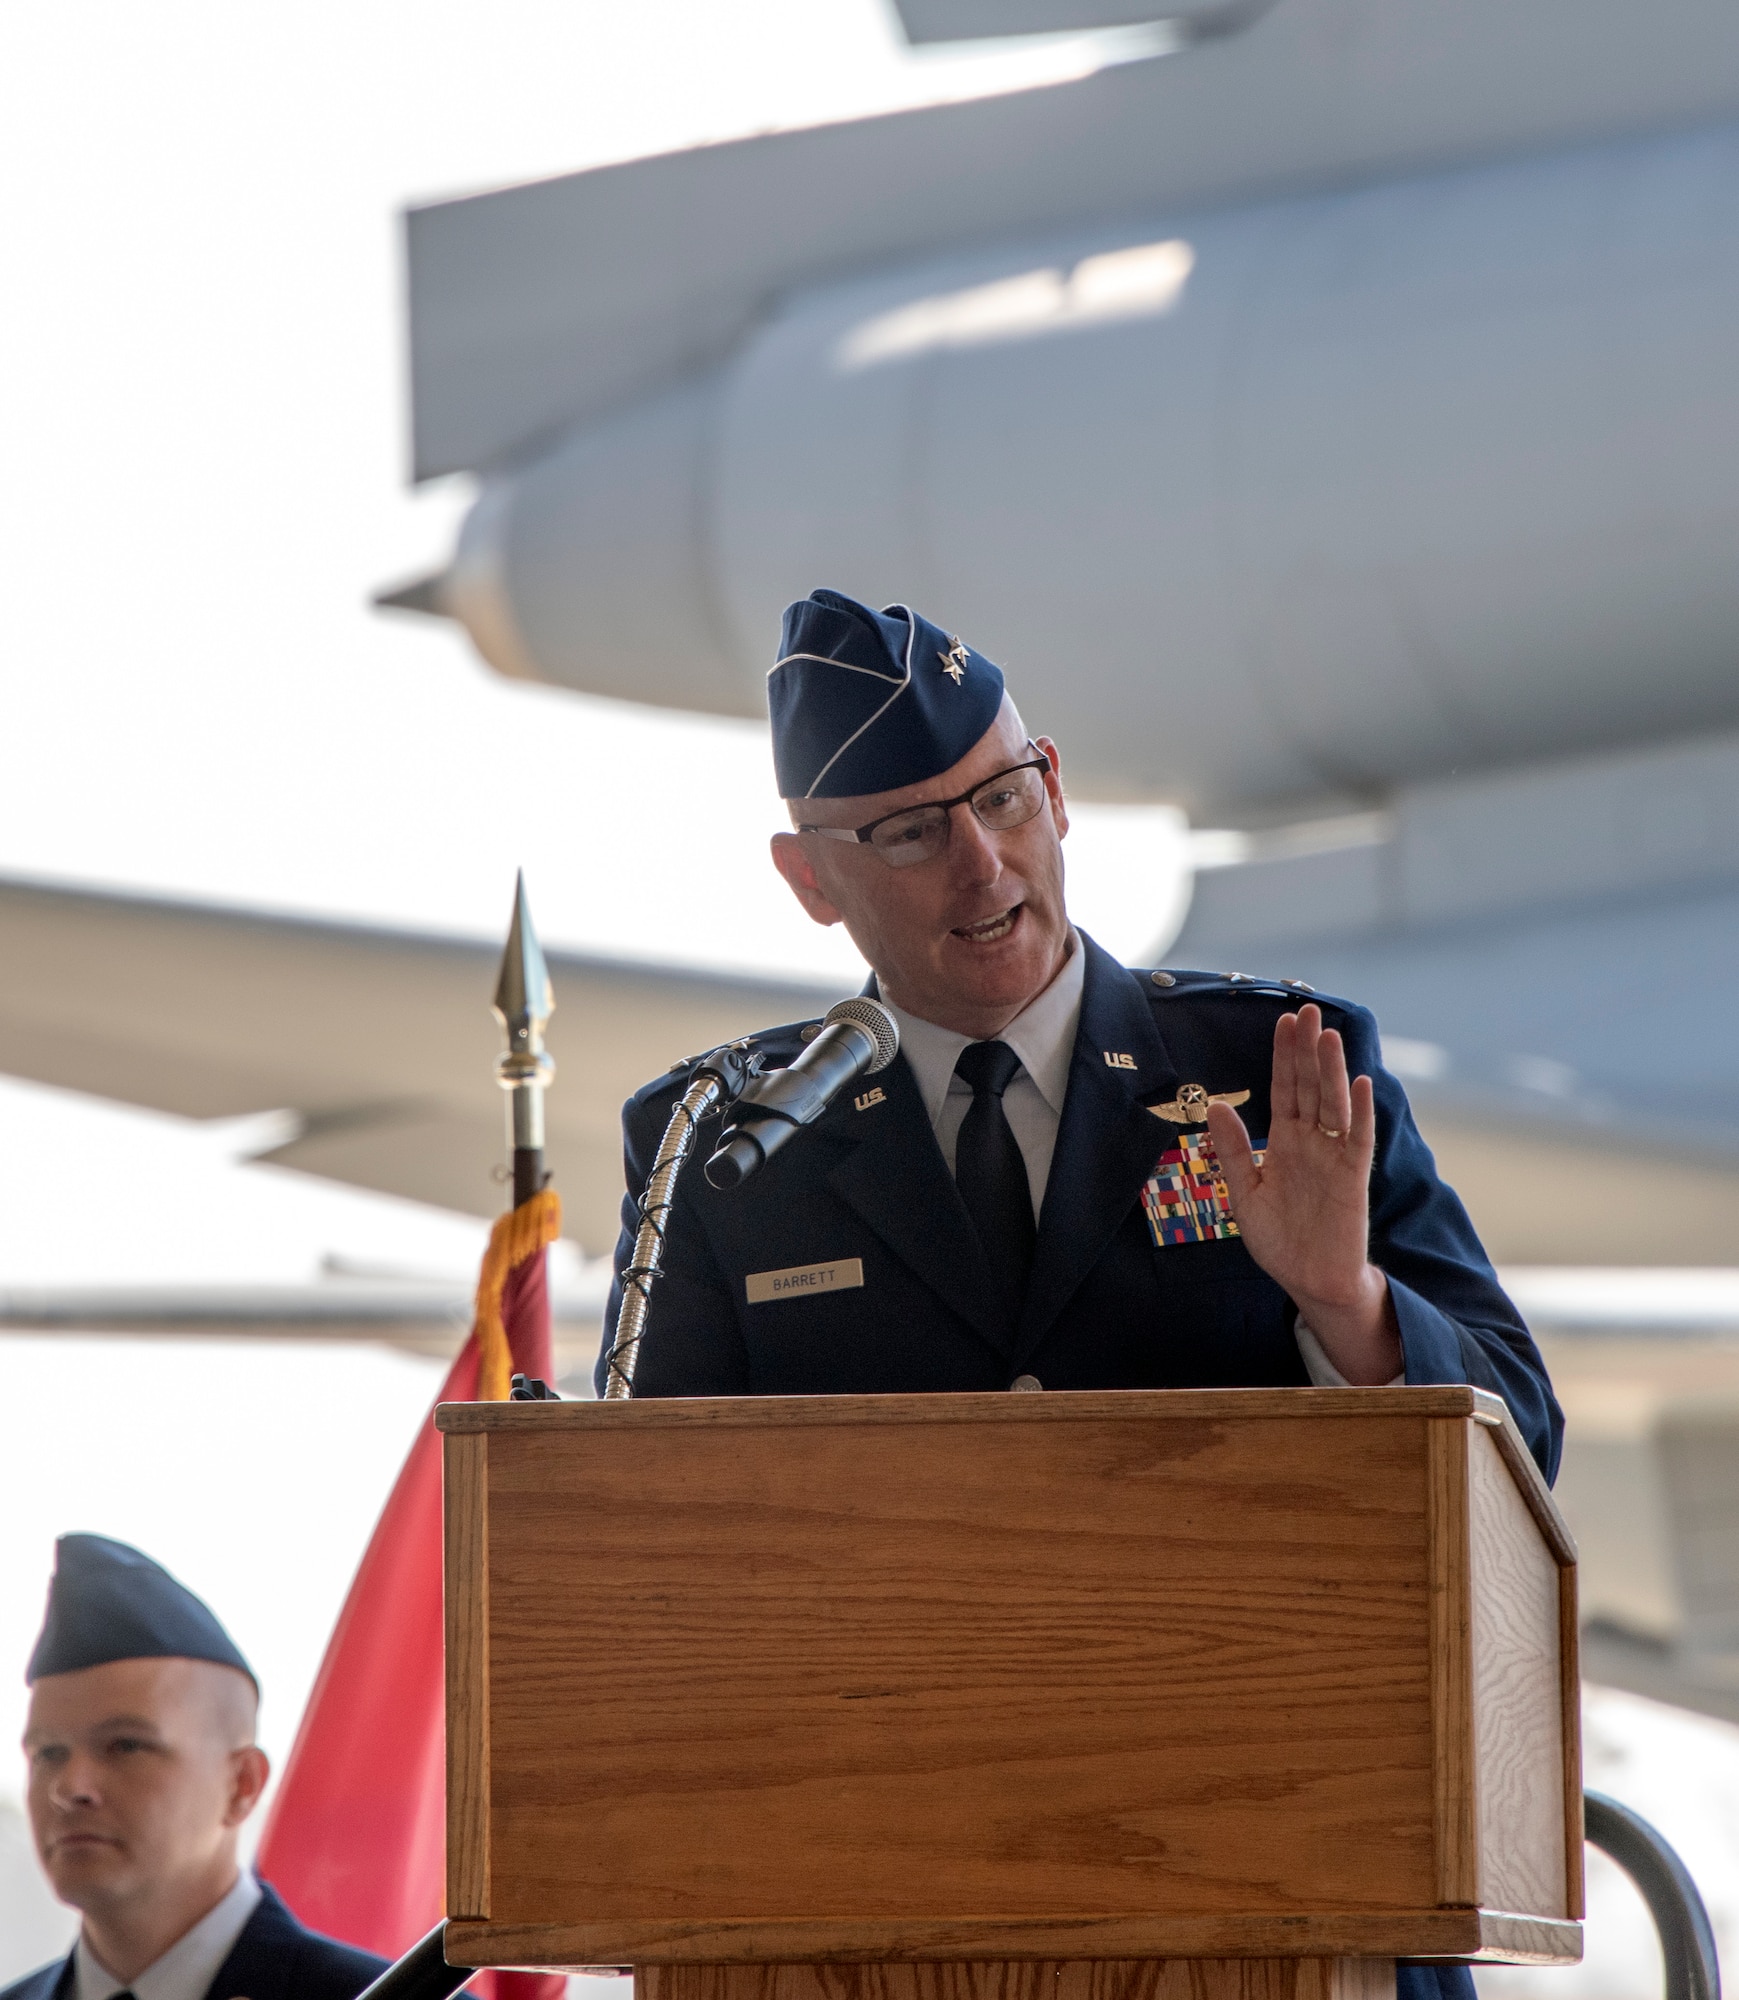 Maj. Gen. Sam Barrett, 18th Air Force commander, presides over the 60th Air Mobility Wing assumption of command ceremony at Travis Air Force Base, Calif., Sept. 18, 2018. During the ceremony, Col. Jeff Nelson, assumed command of Air Mobility Command’s largest wing. (U.S. Air Force photo by Heide Couch)